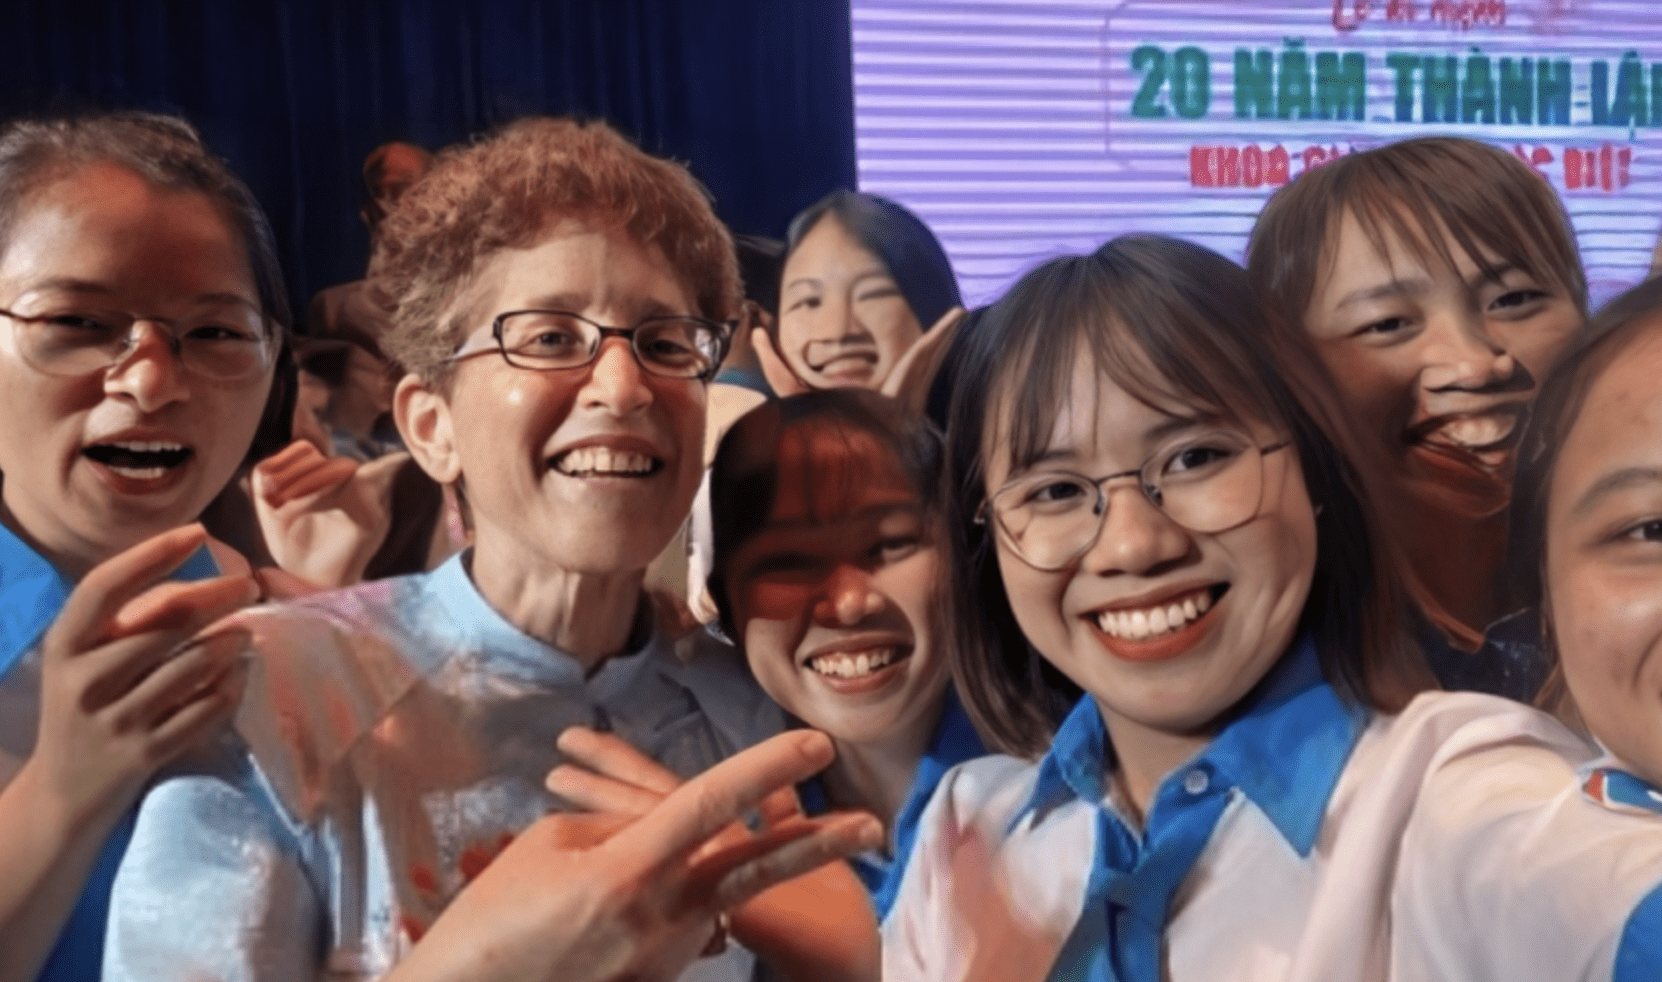 UMD education professor Dr. De La Paz poses with her Fulbright students in Vietnam.